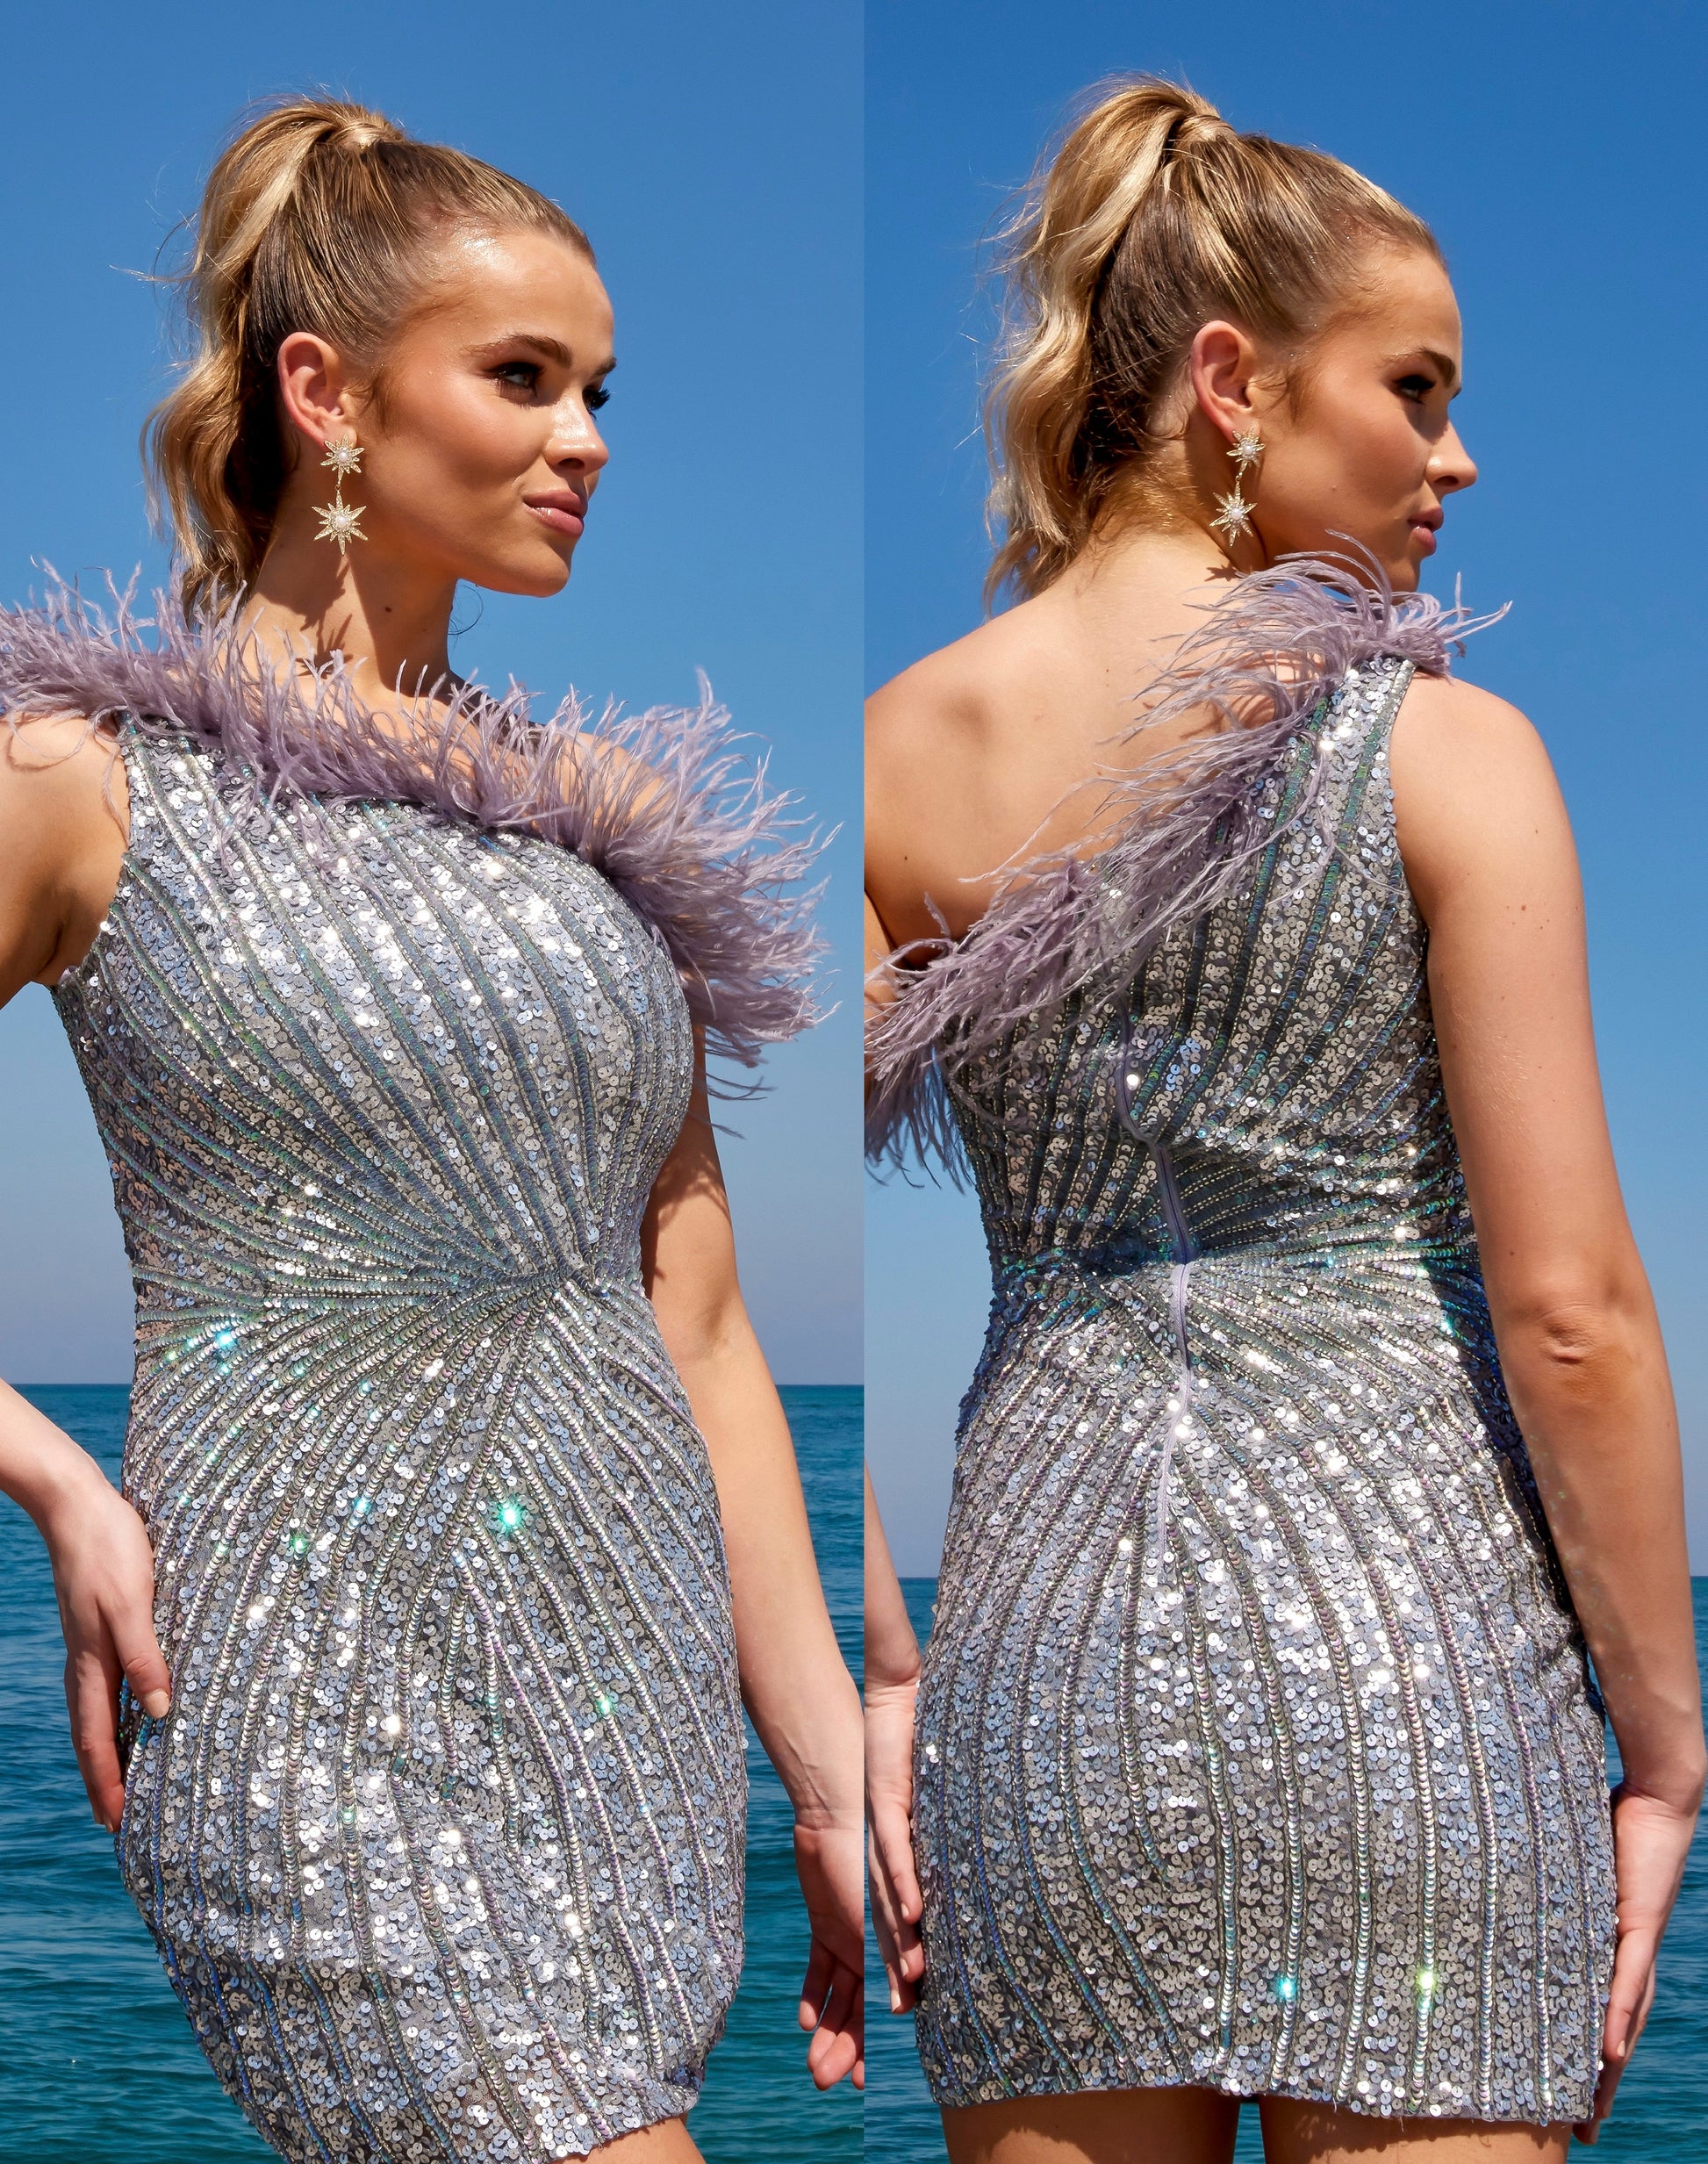 The Primavera Couture 4002 One Shoulder Cocktail Dress is an unforgettable look for your special occasion. A striking one shoulder silhouette is fully embellished with shimmering sequins and features an elegant feather trim. Add sparkle and sophistication to your evening with this showstopping dress.